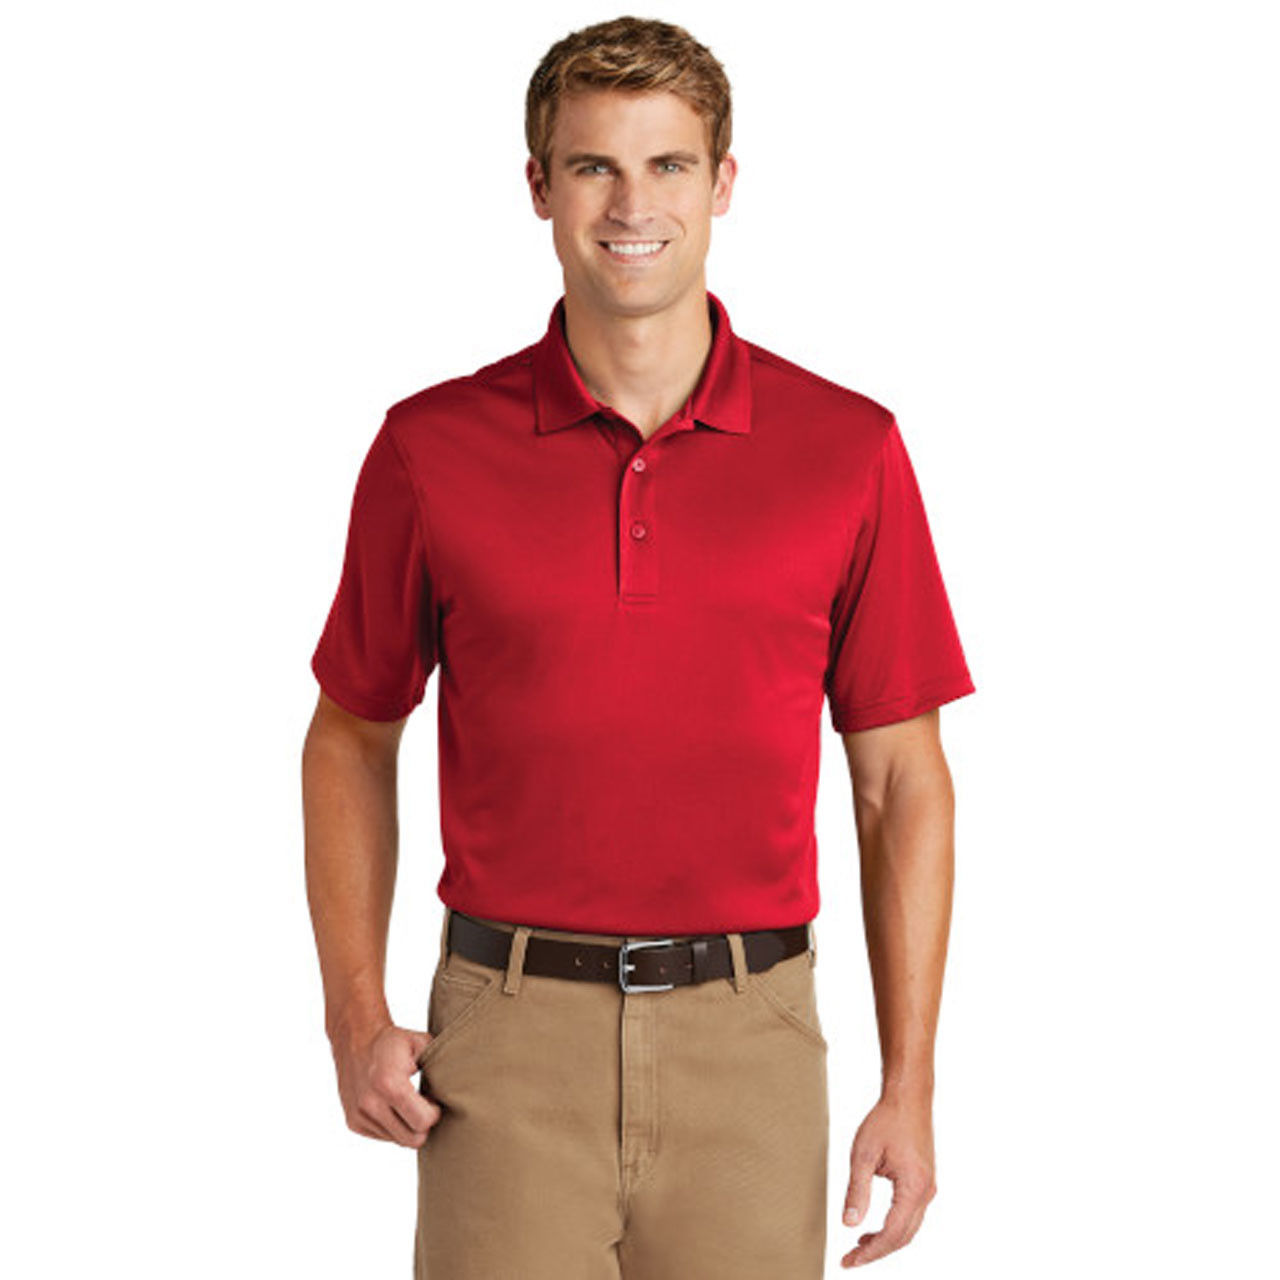 Does the men's red polo and khaki pants have long sleeves?